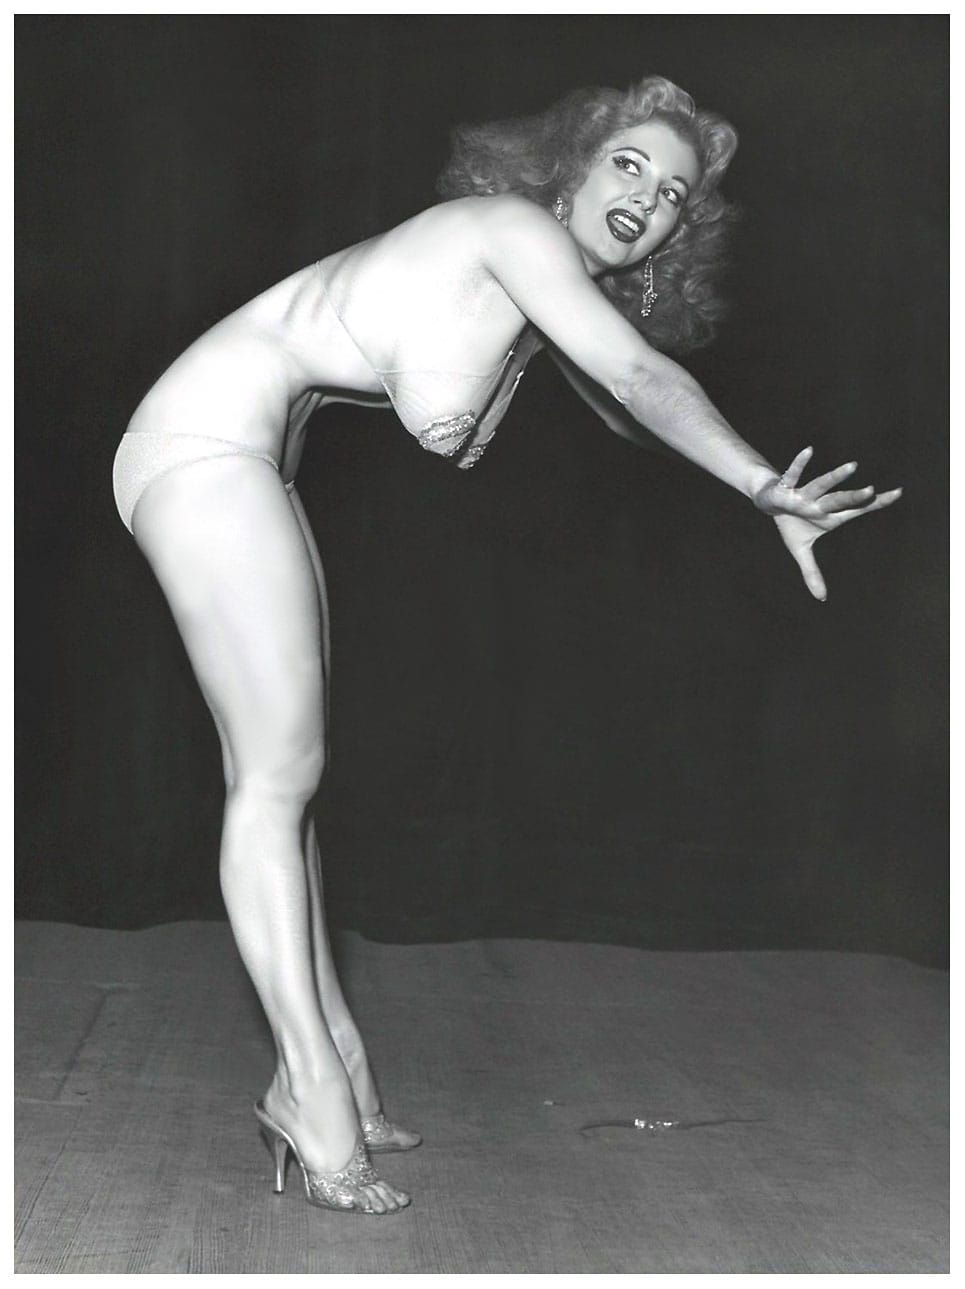 Tempest storm young